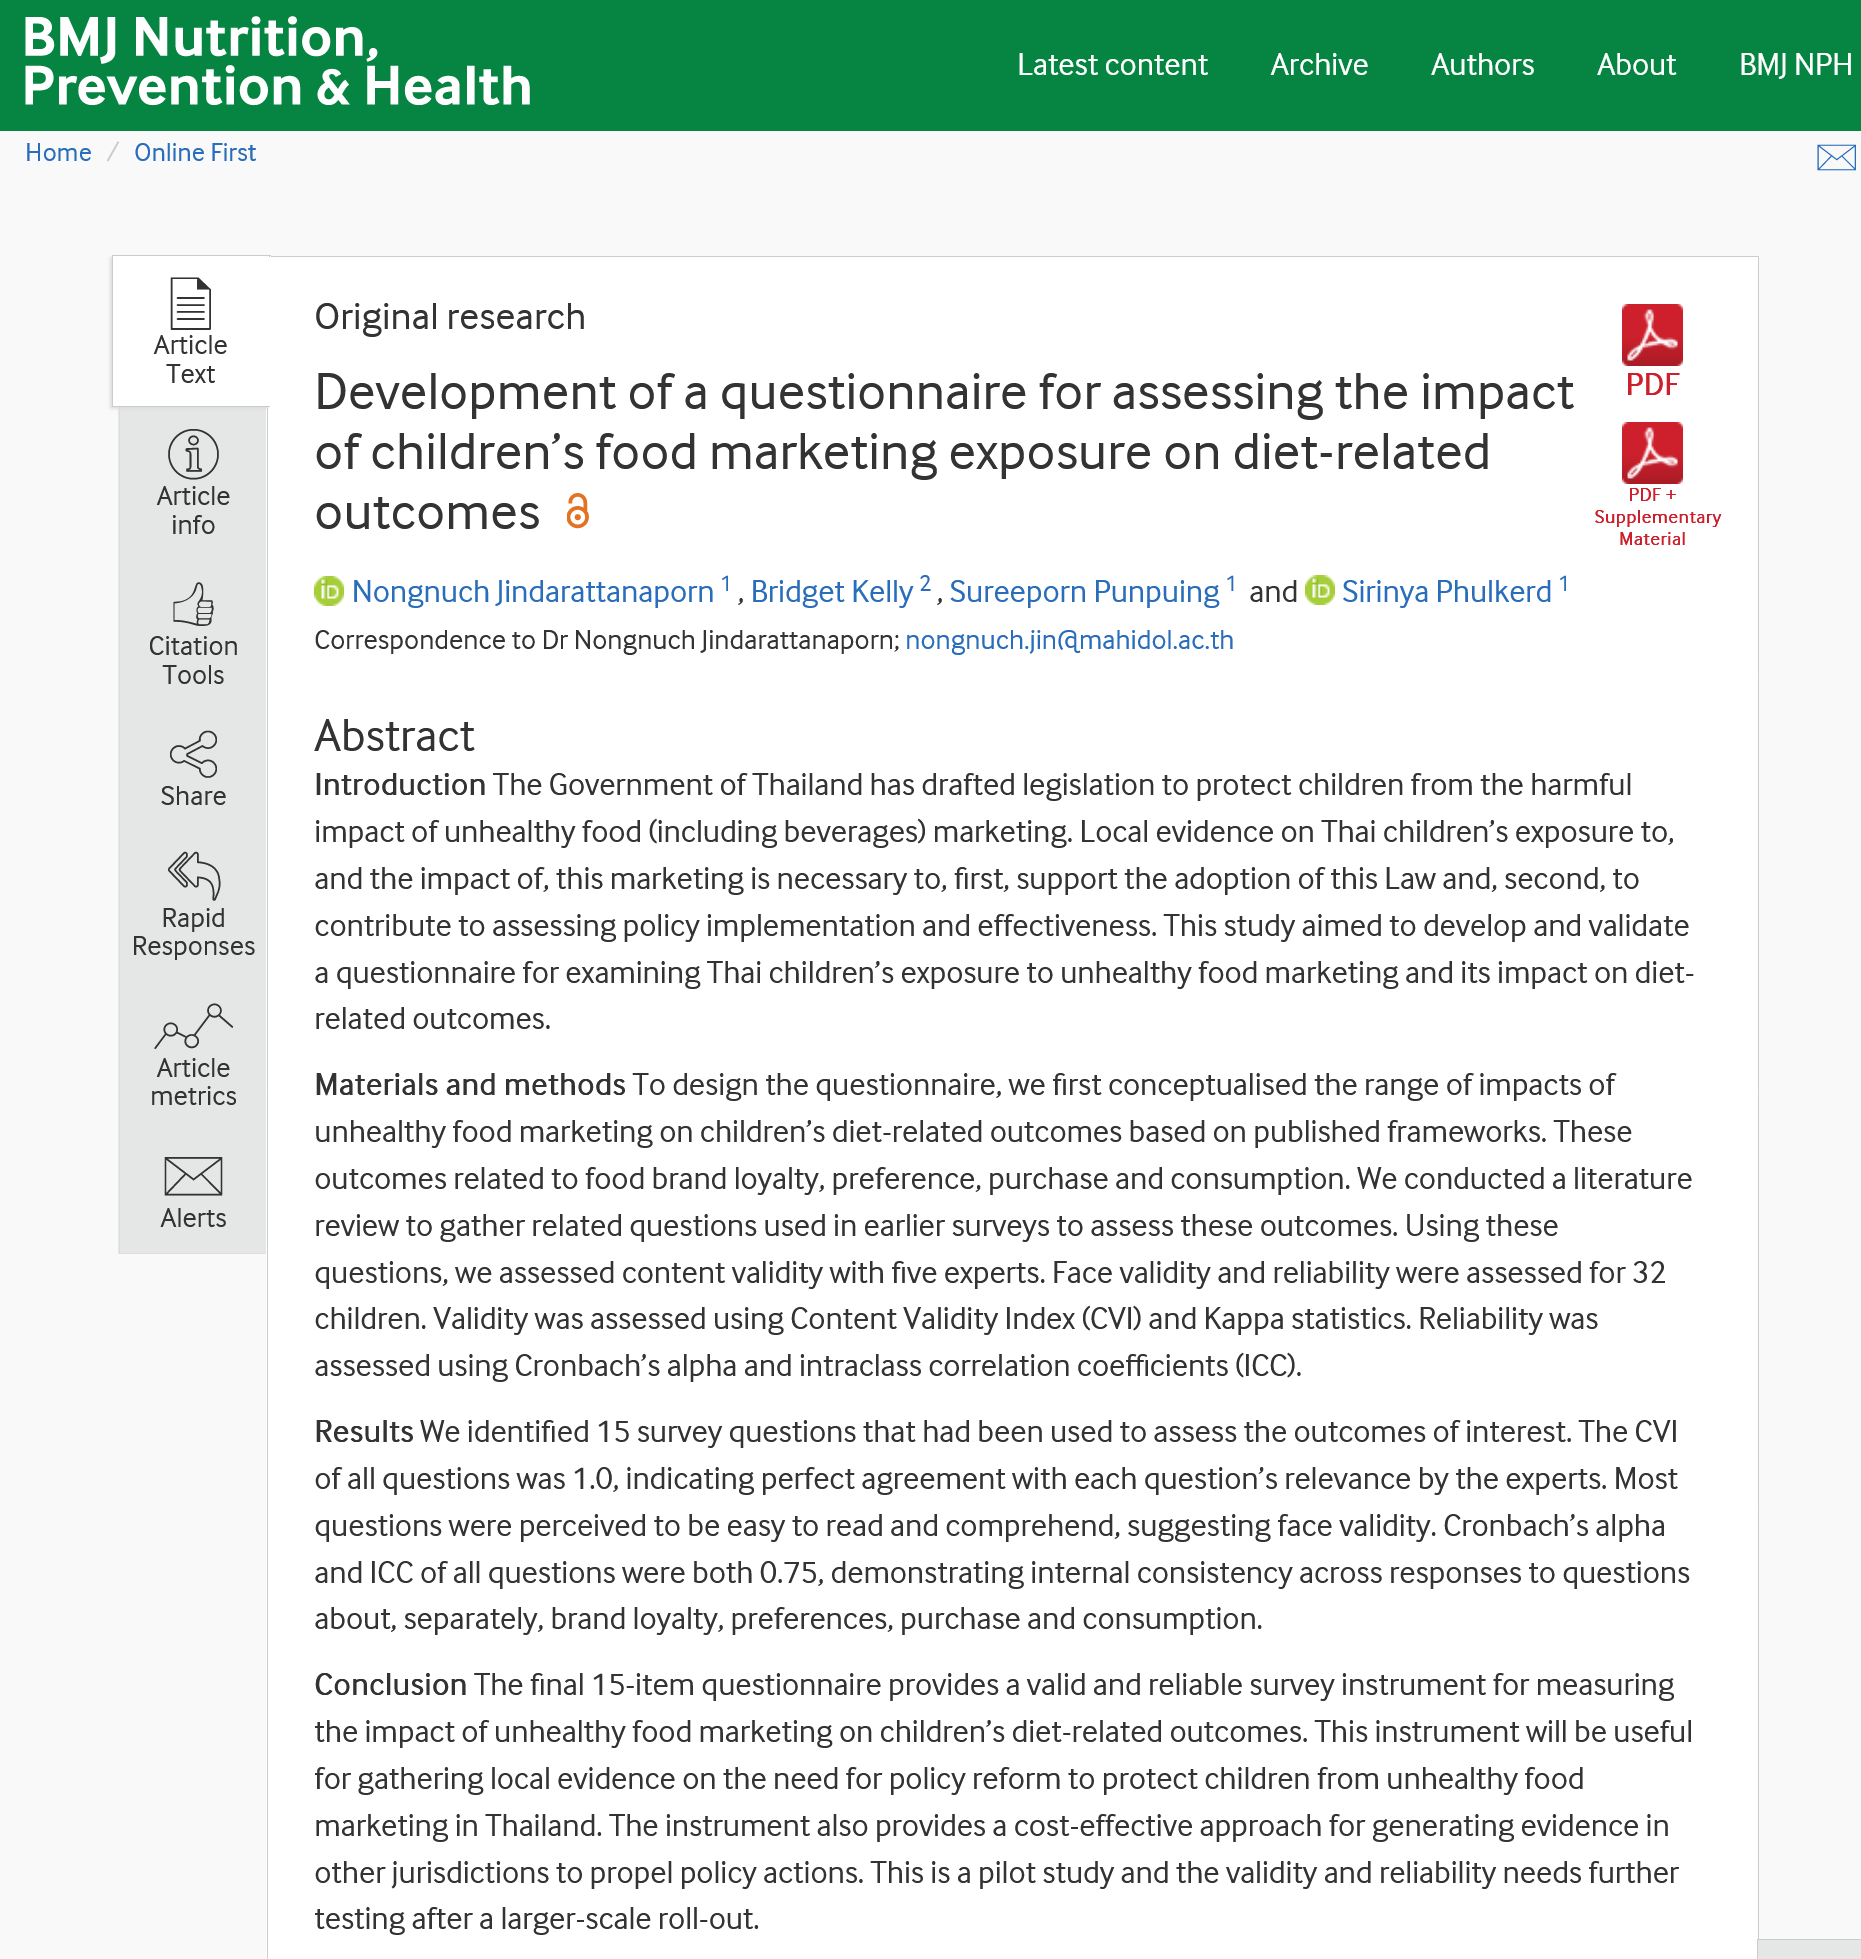 Development of a questionnaire for assessing the impact of children’s food marketing exposure on diet-related outcomes